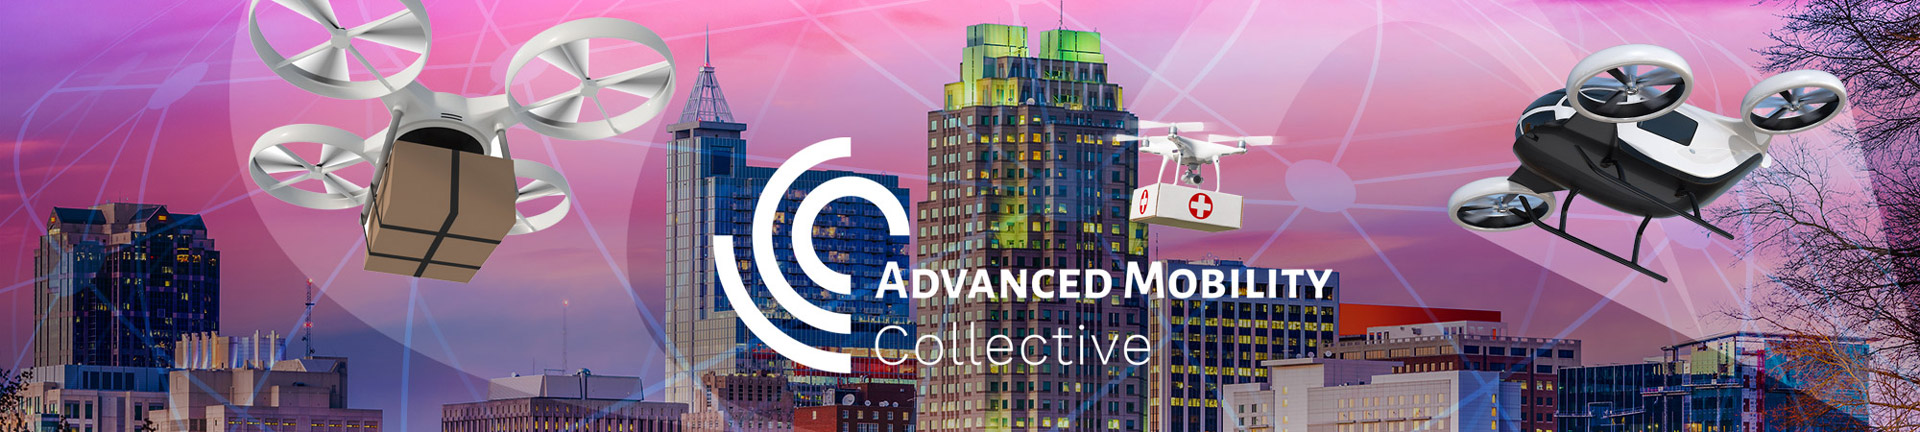 advanced mobility collective header image